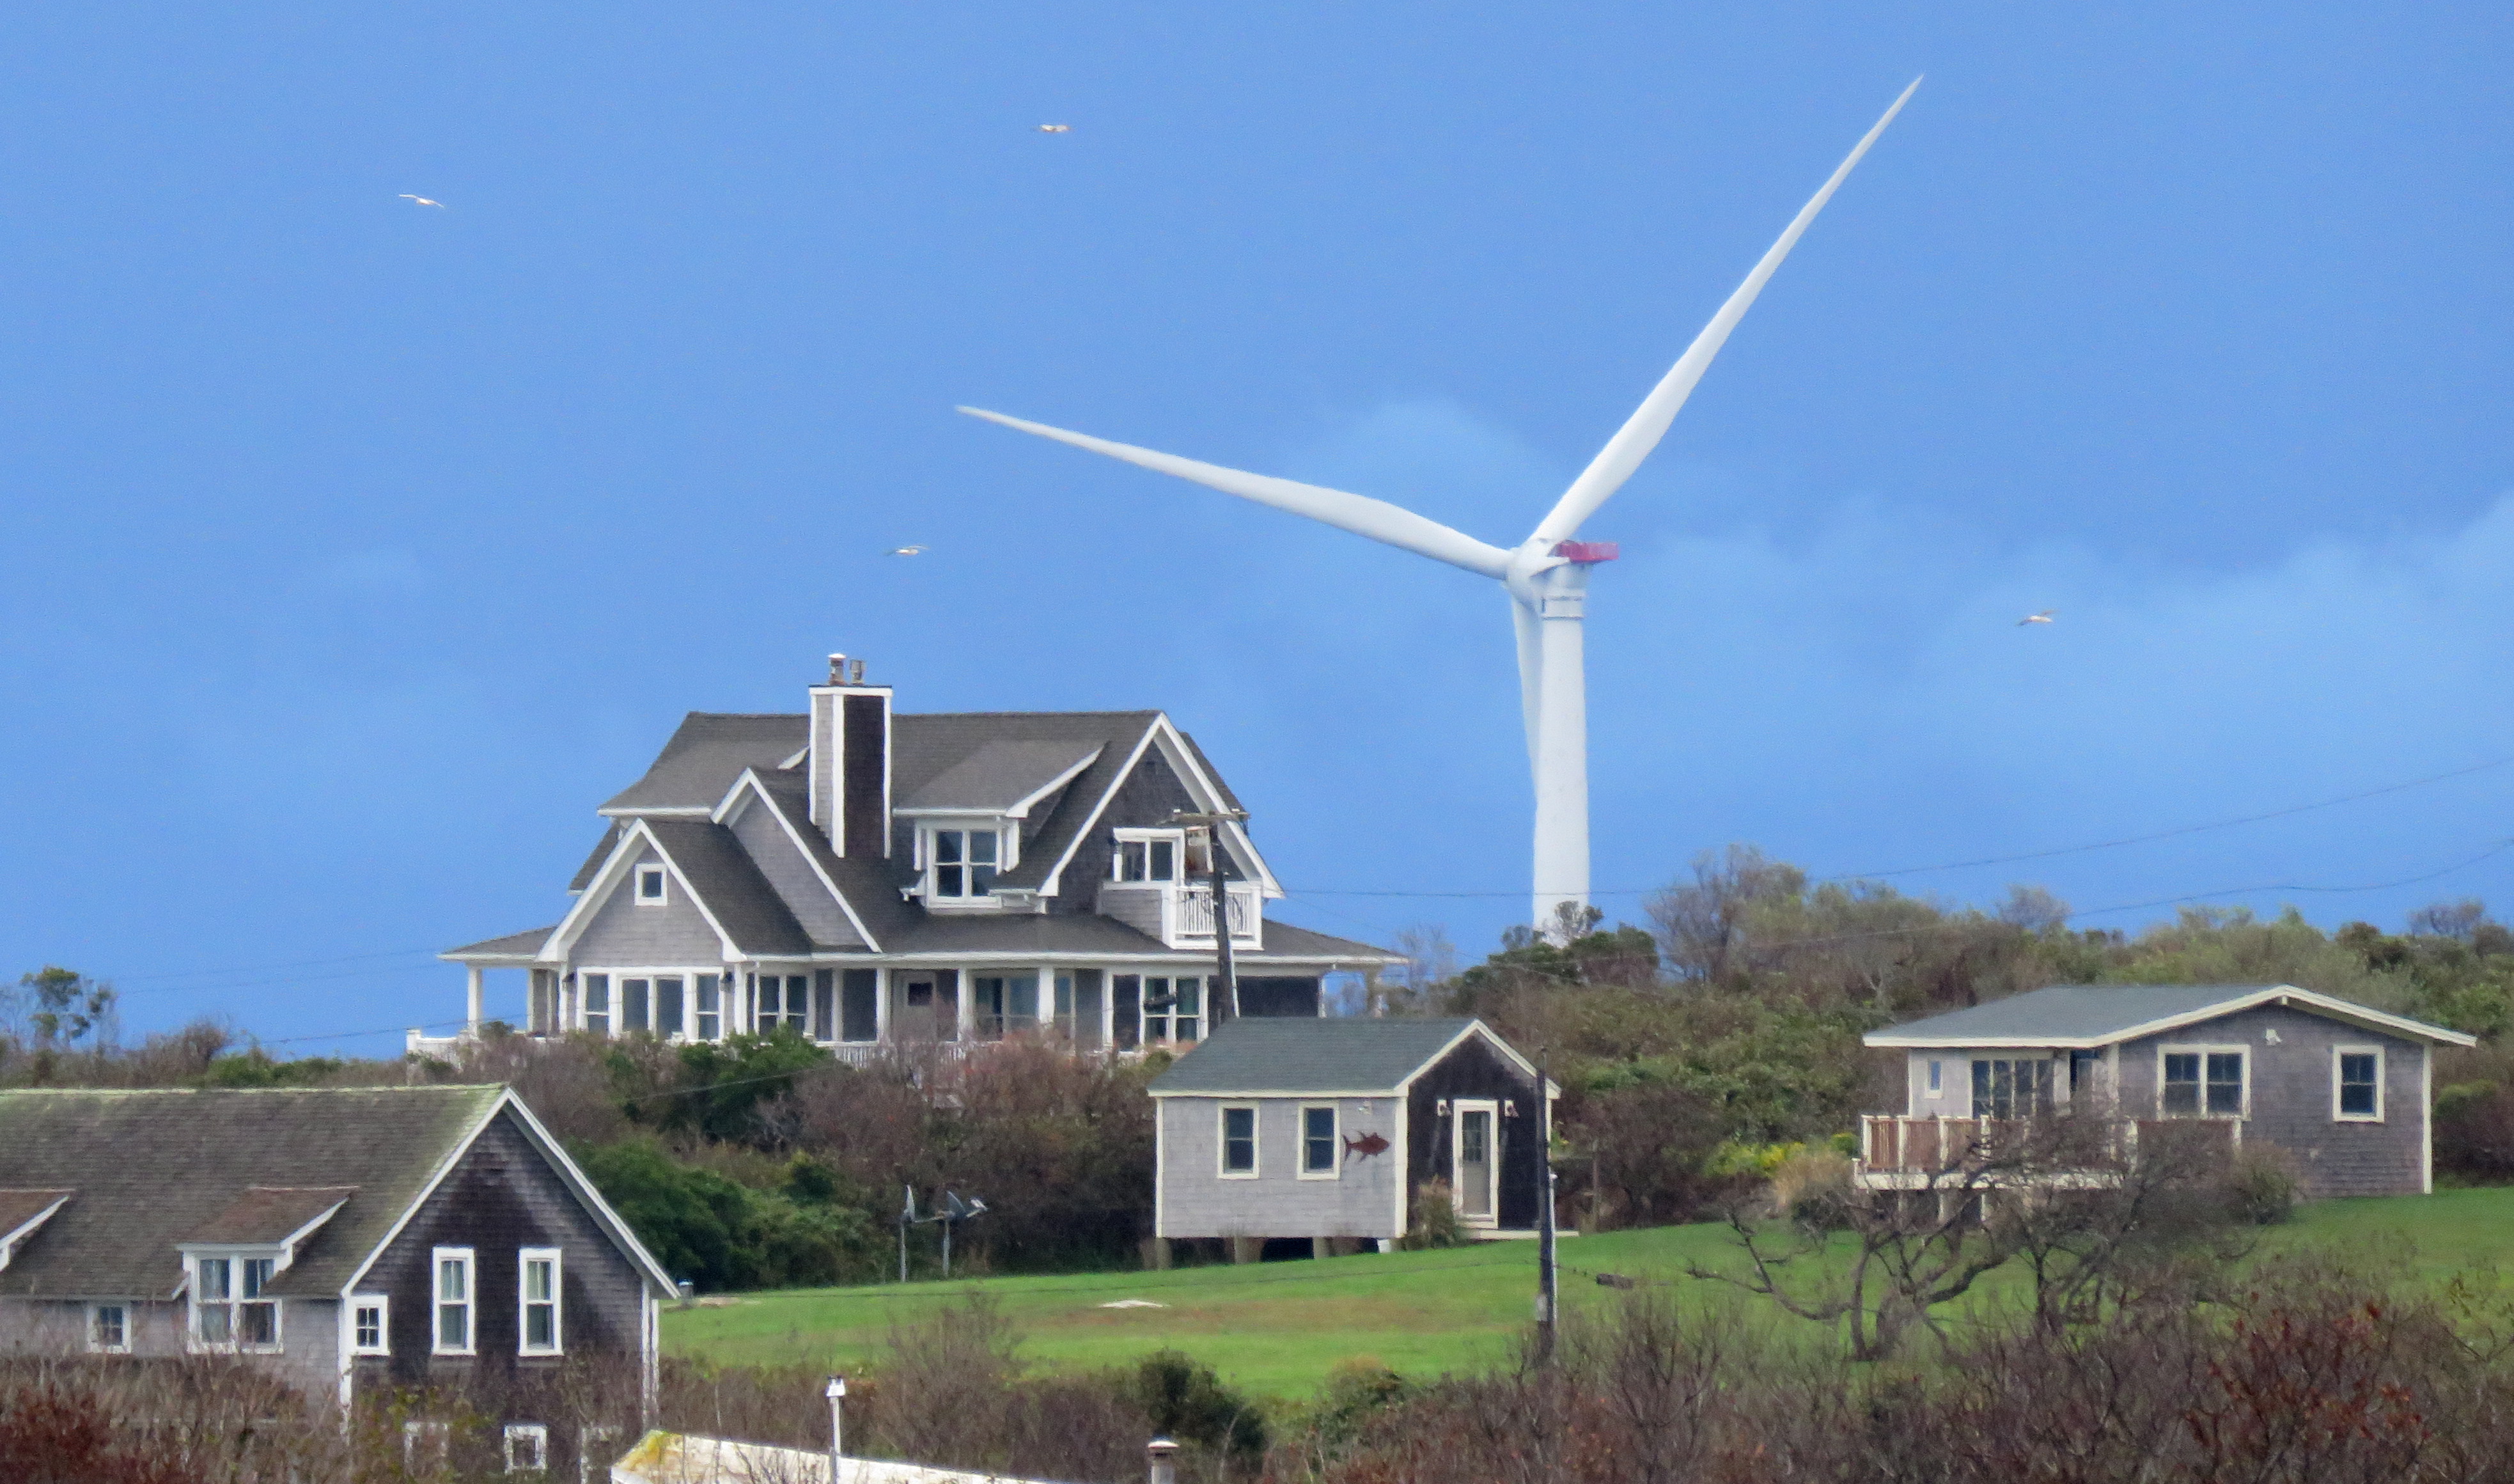 The large blades of a wind turbine rise over a hill with a few houses on it. The turbine dwarfs the houses, even though it is located in the water three miles away.